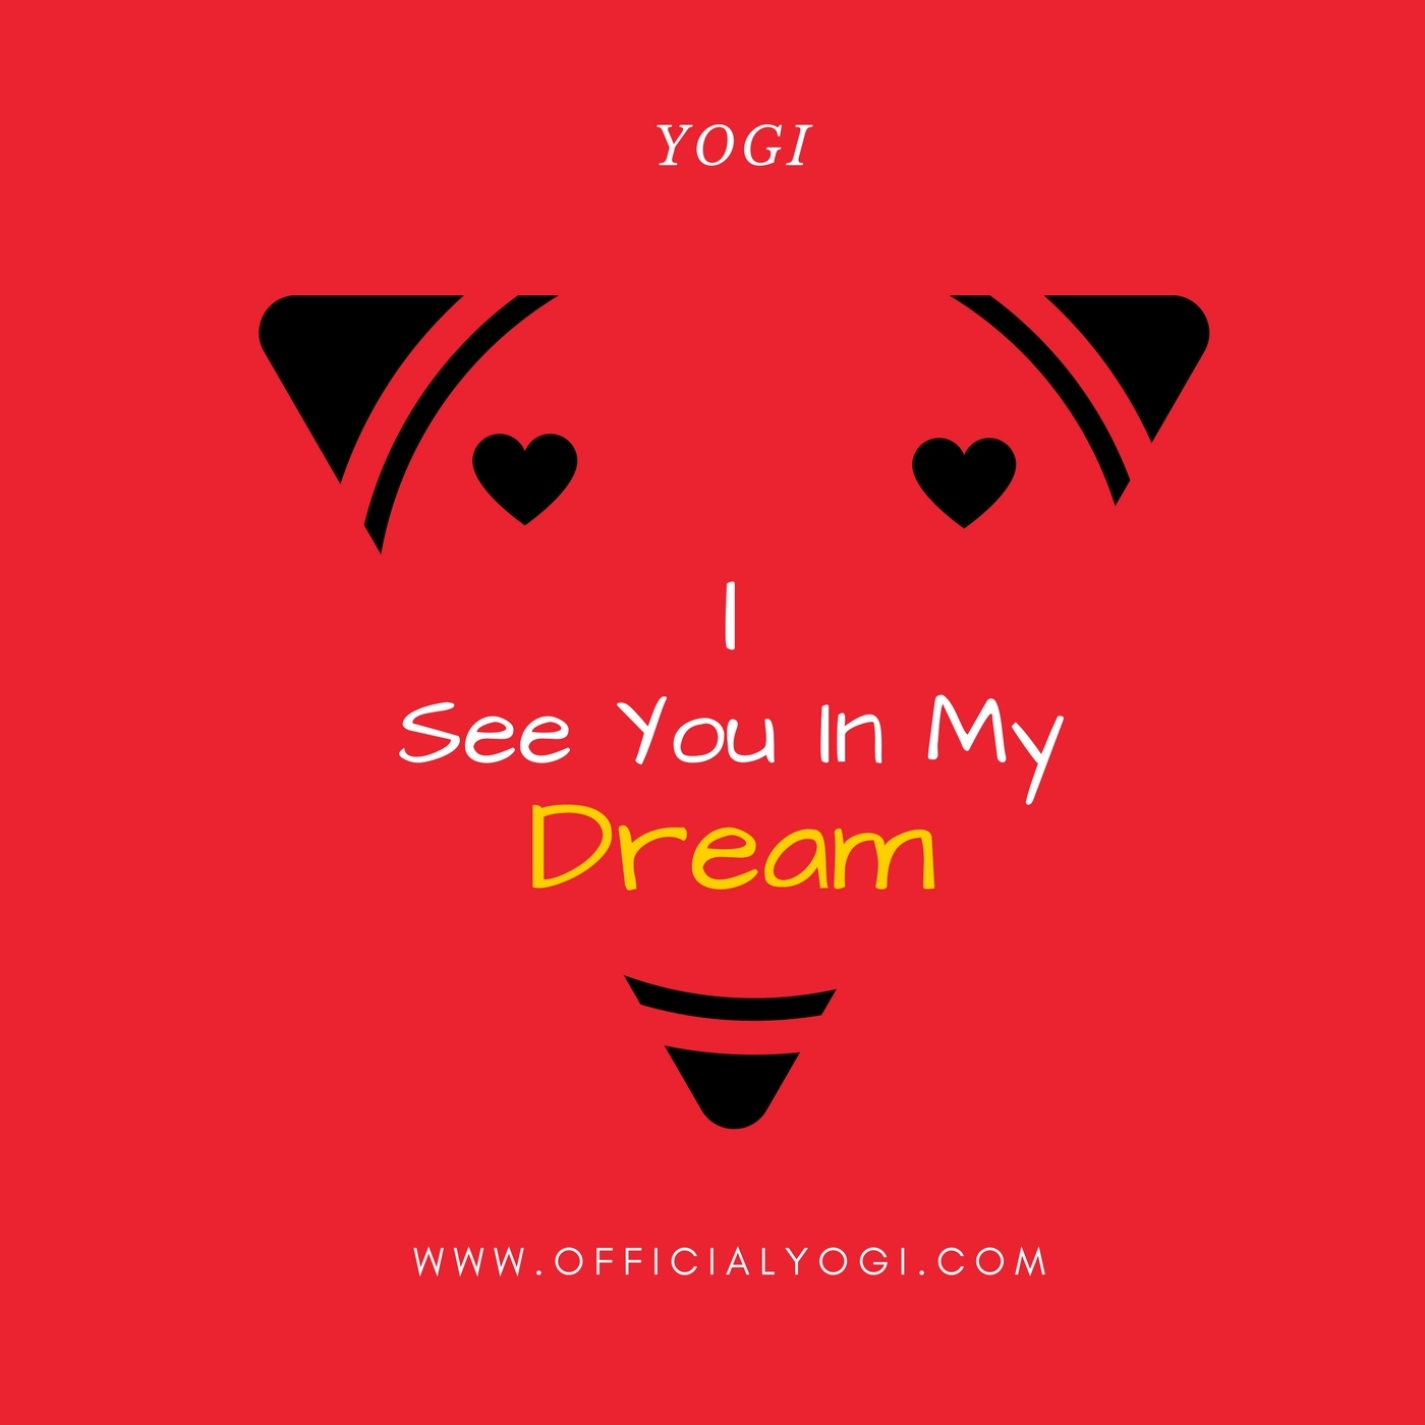 I SEE YOU IN MY DREAM